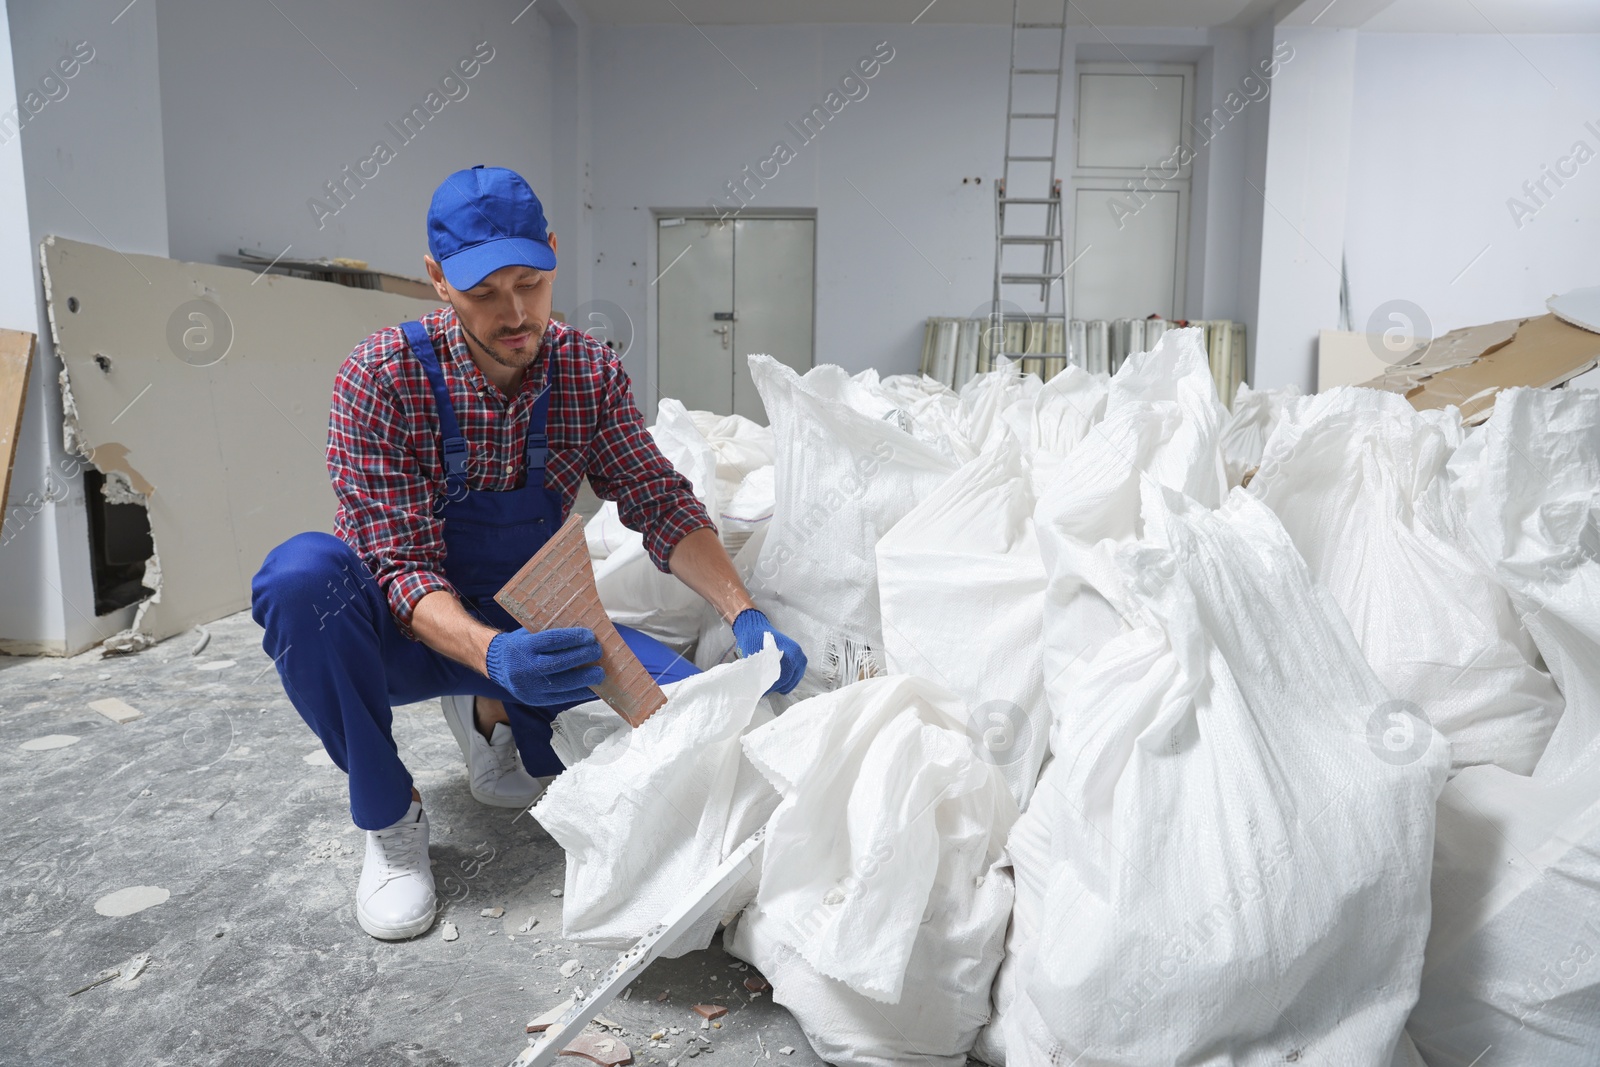 Photo of Construction worker with used building materials in room prepared for renovation